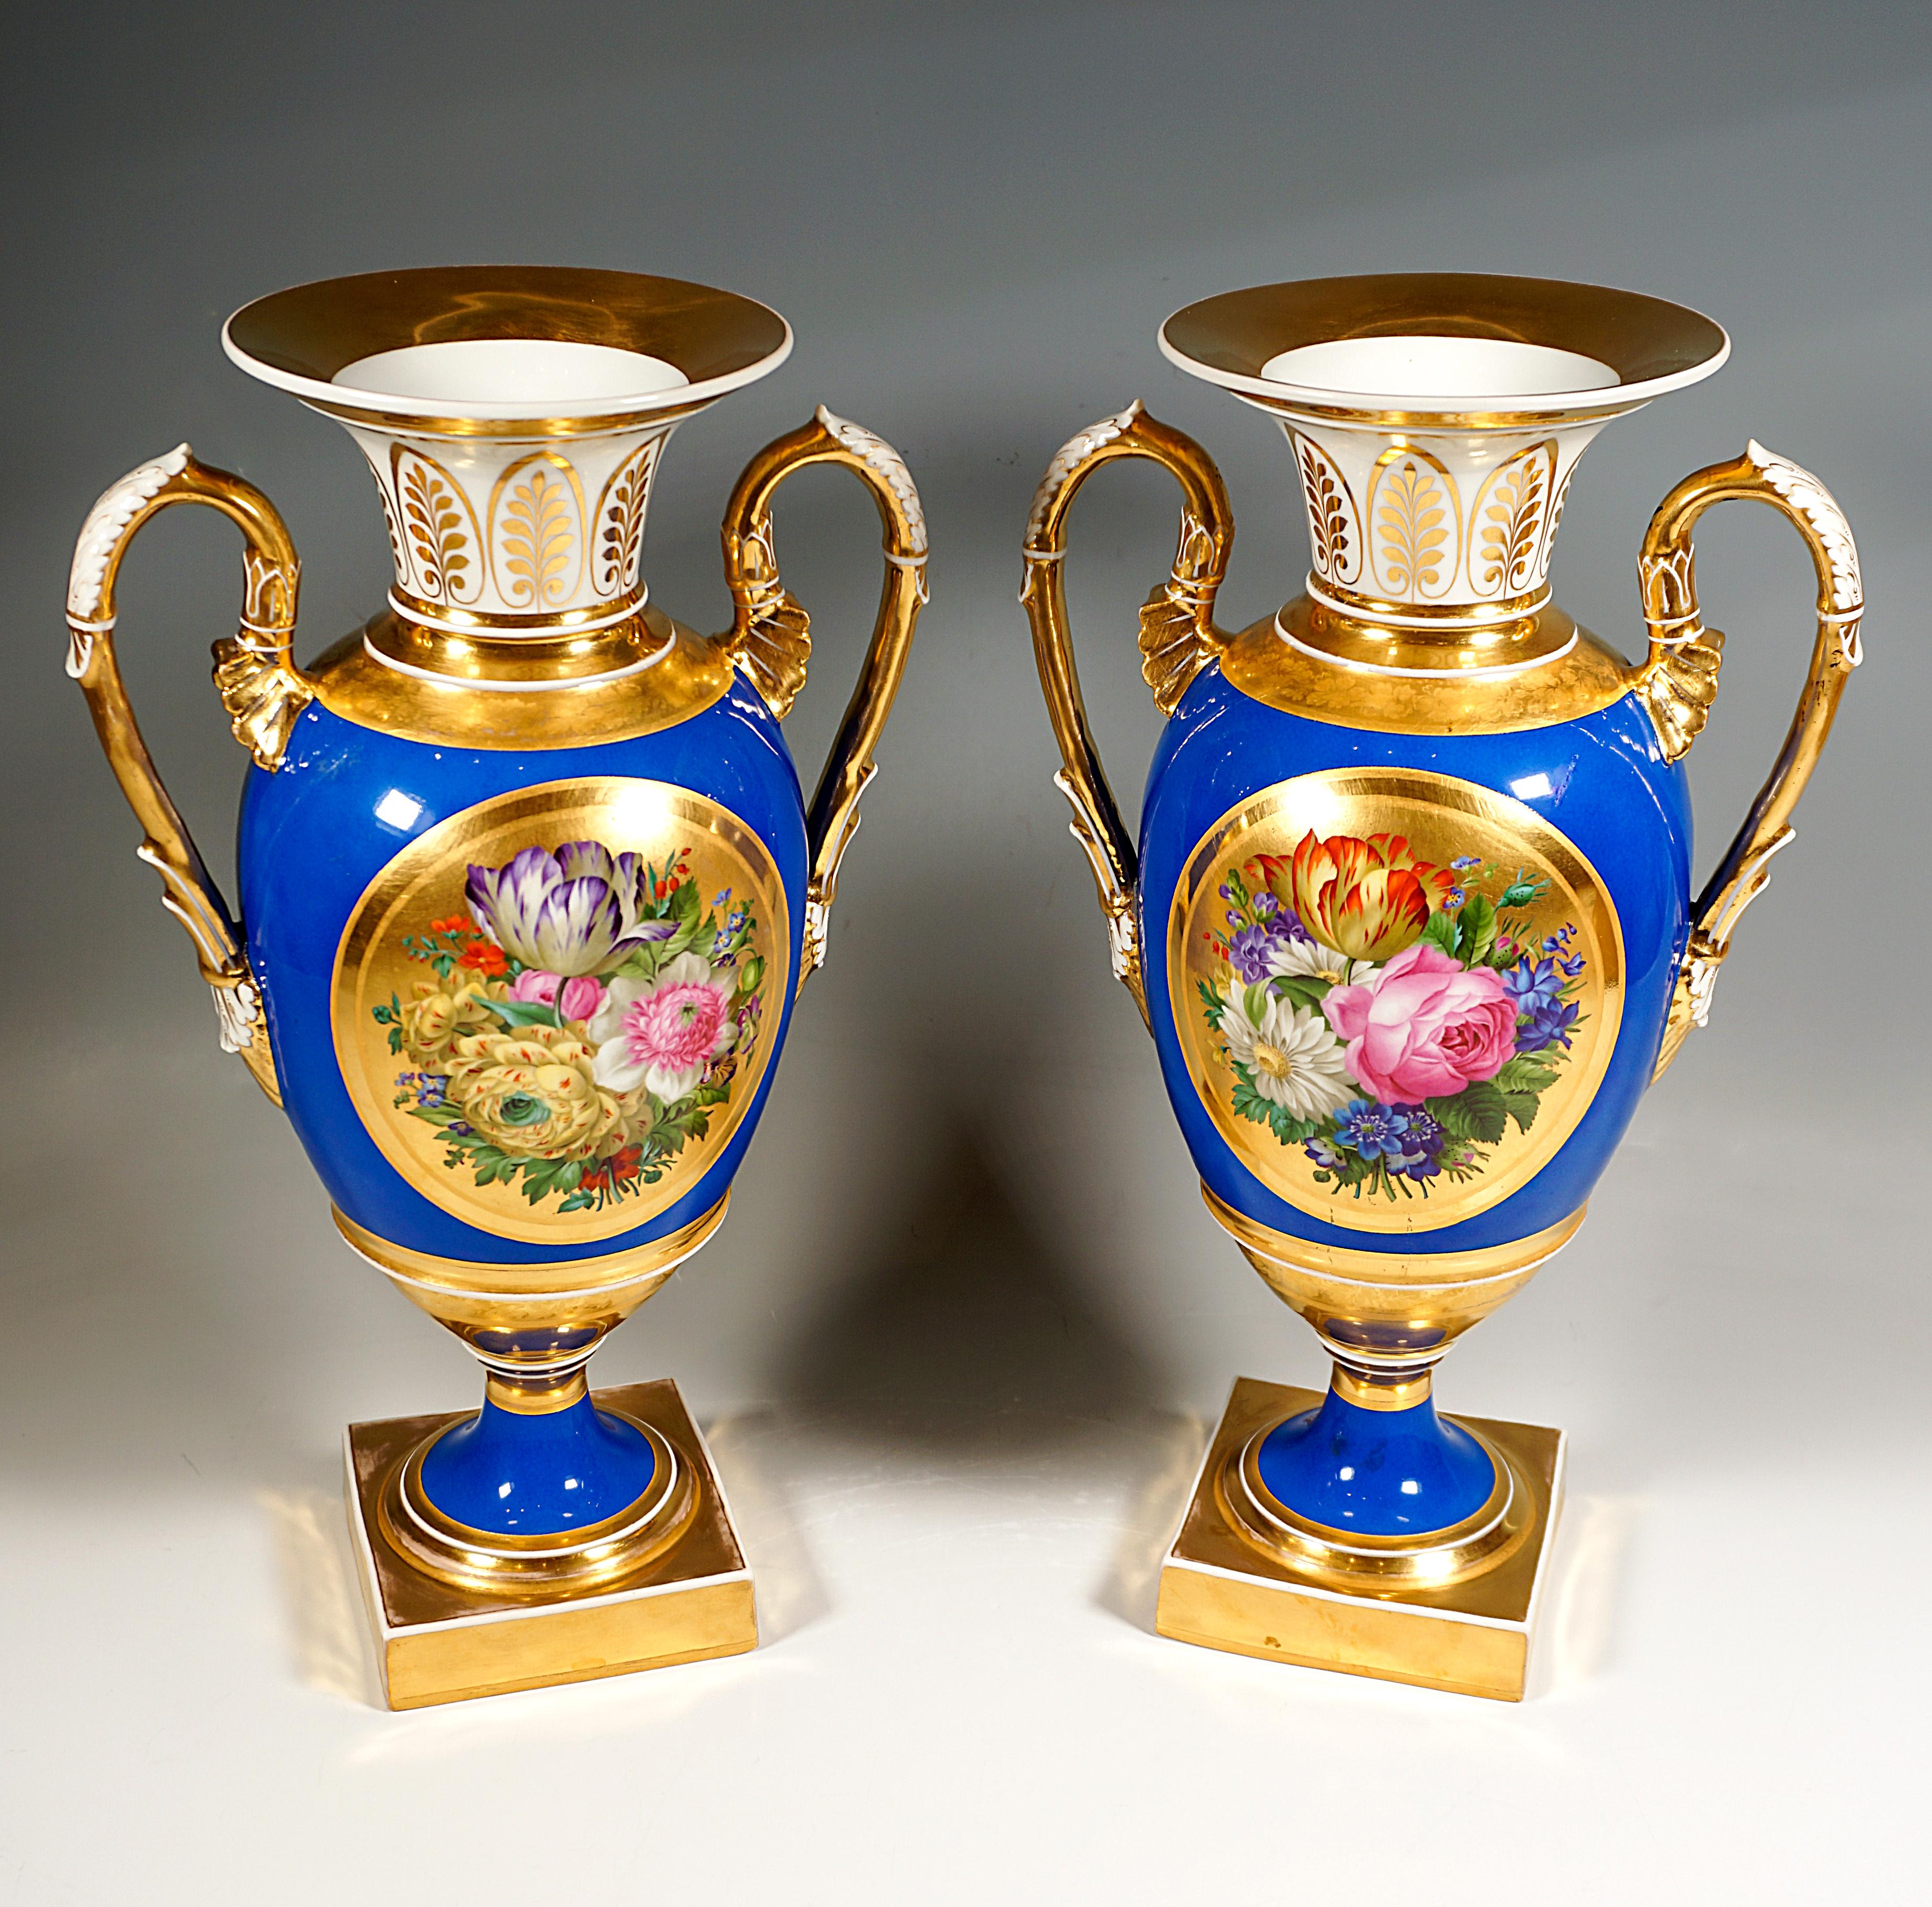 Hand-Crafted Pair of Imperial Vienna Amphora Vases, Rich Bouquet Painting, Leopold Lieb 1828